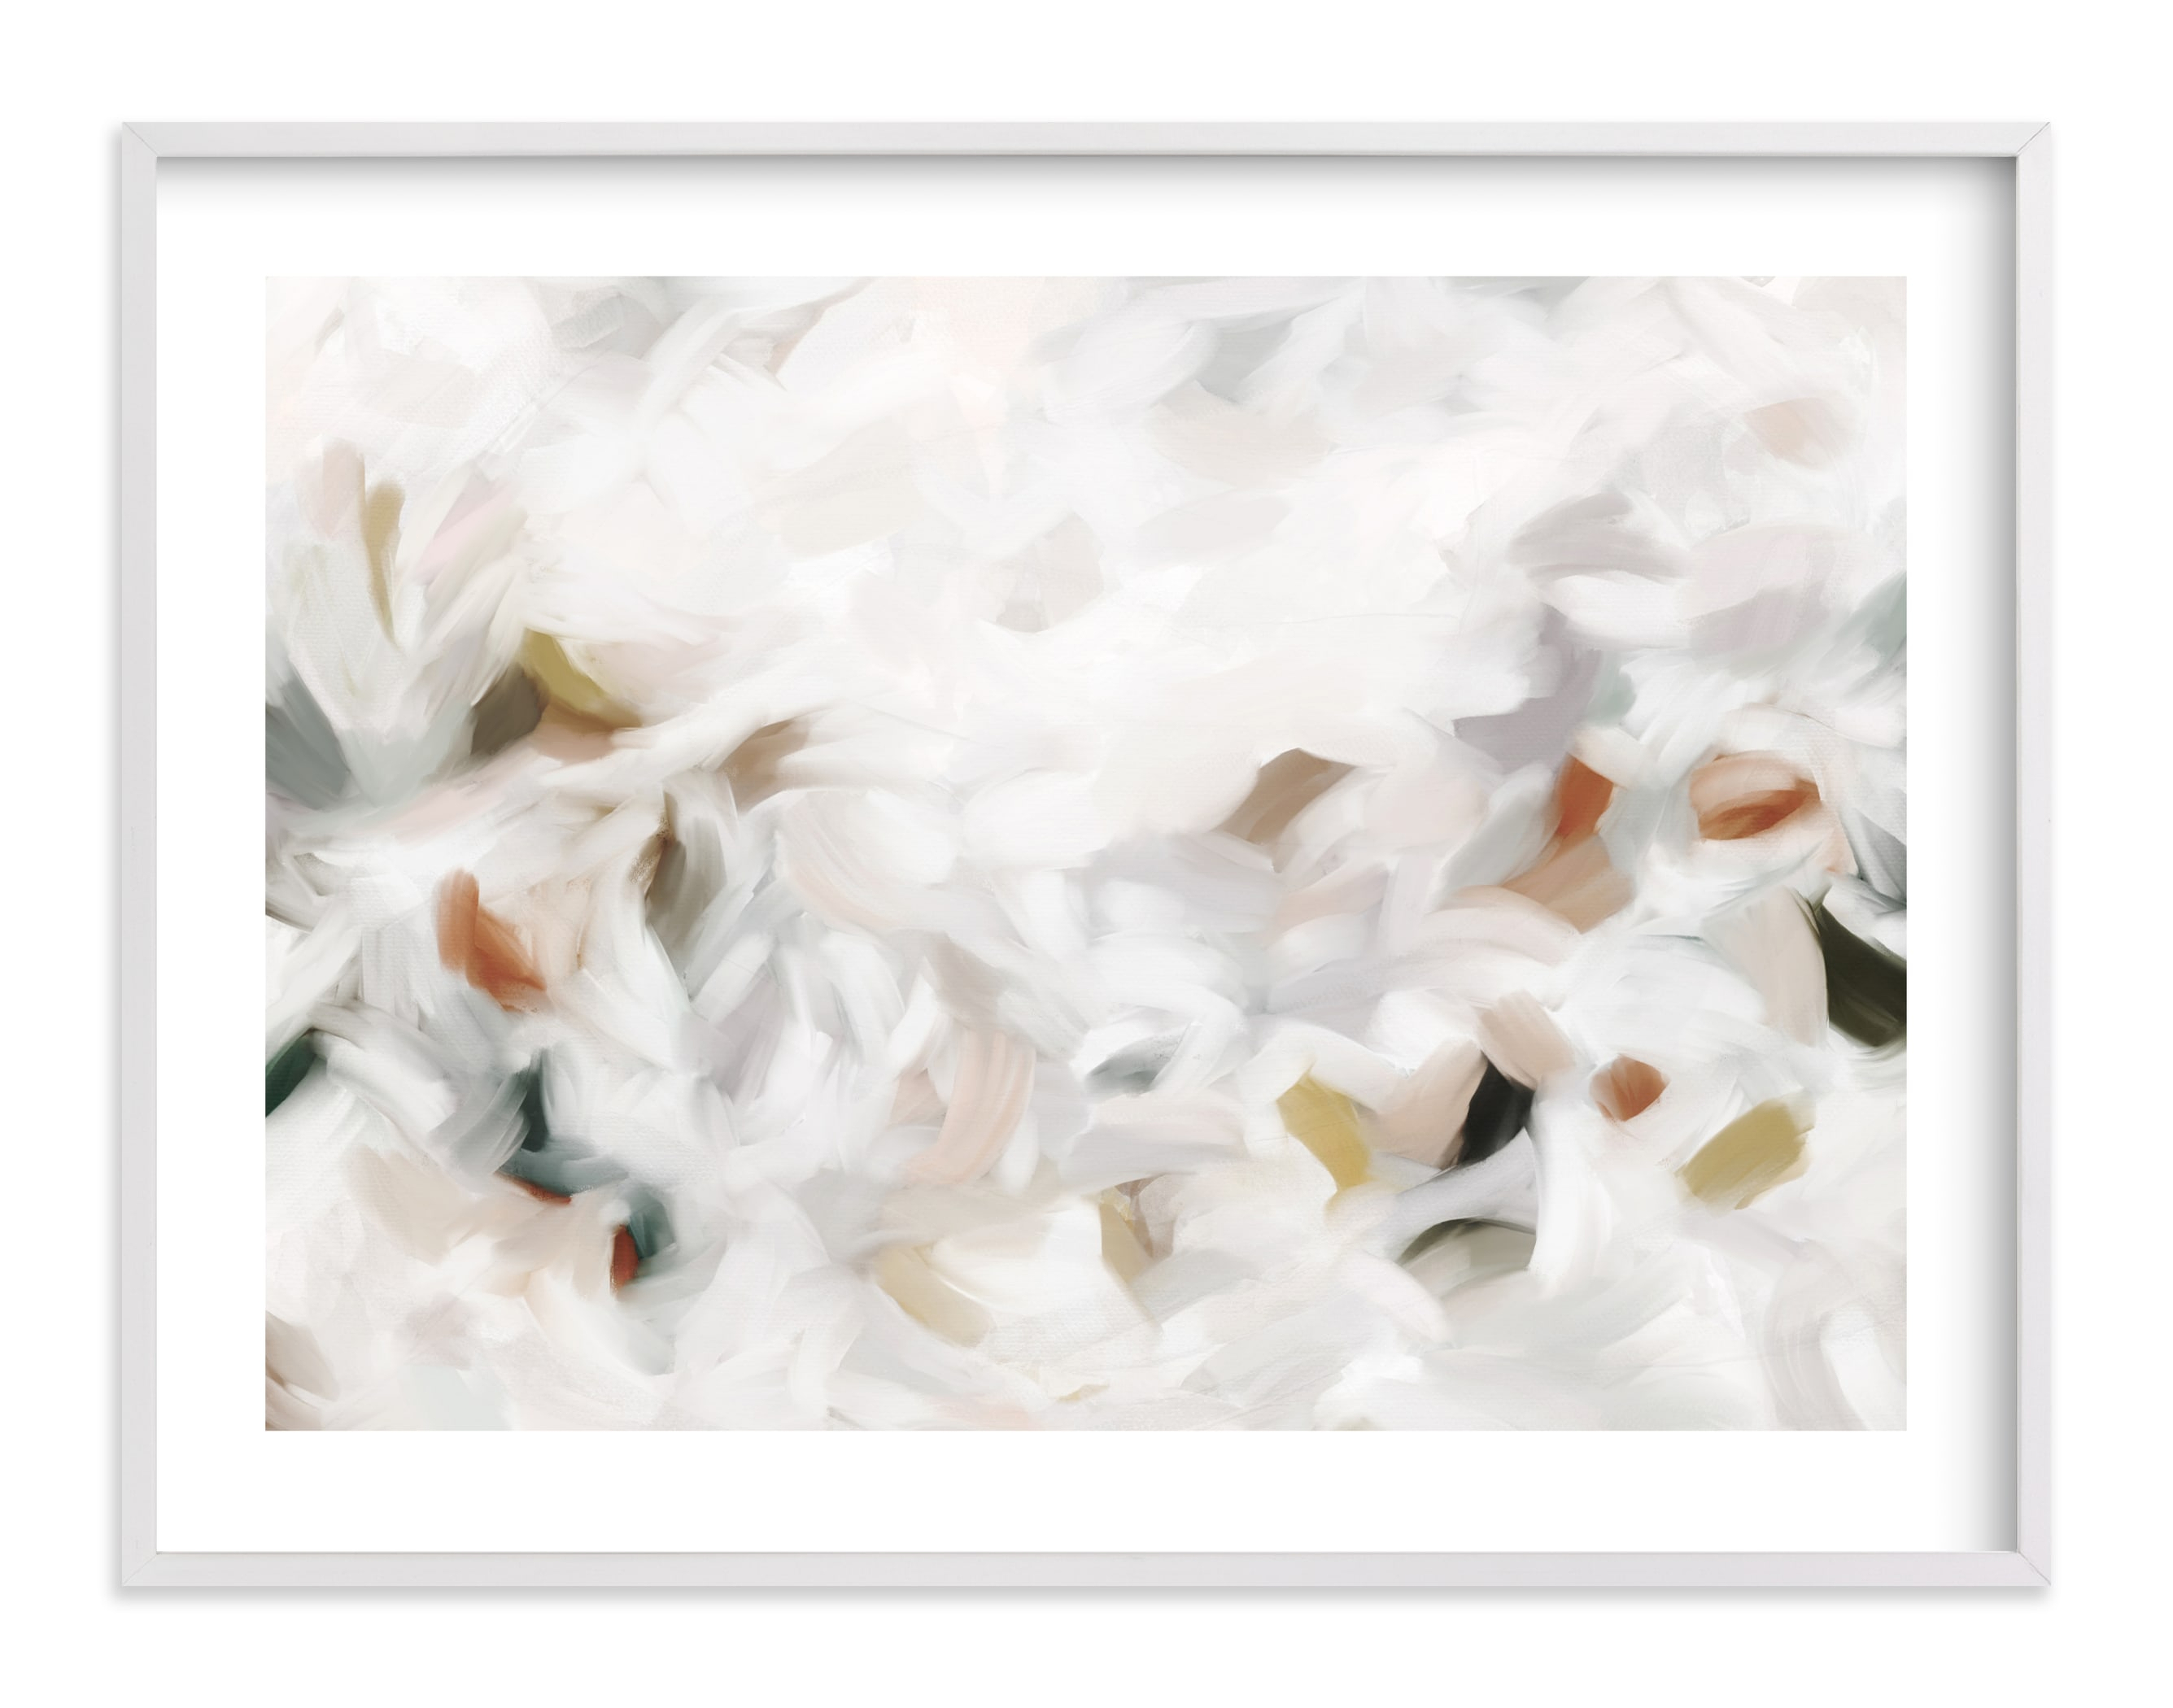 Custom Ethereal Composition by Melanie Severin with White Border & White Wood Frame - 40"x30" - Minted